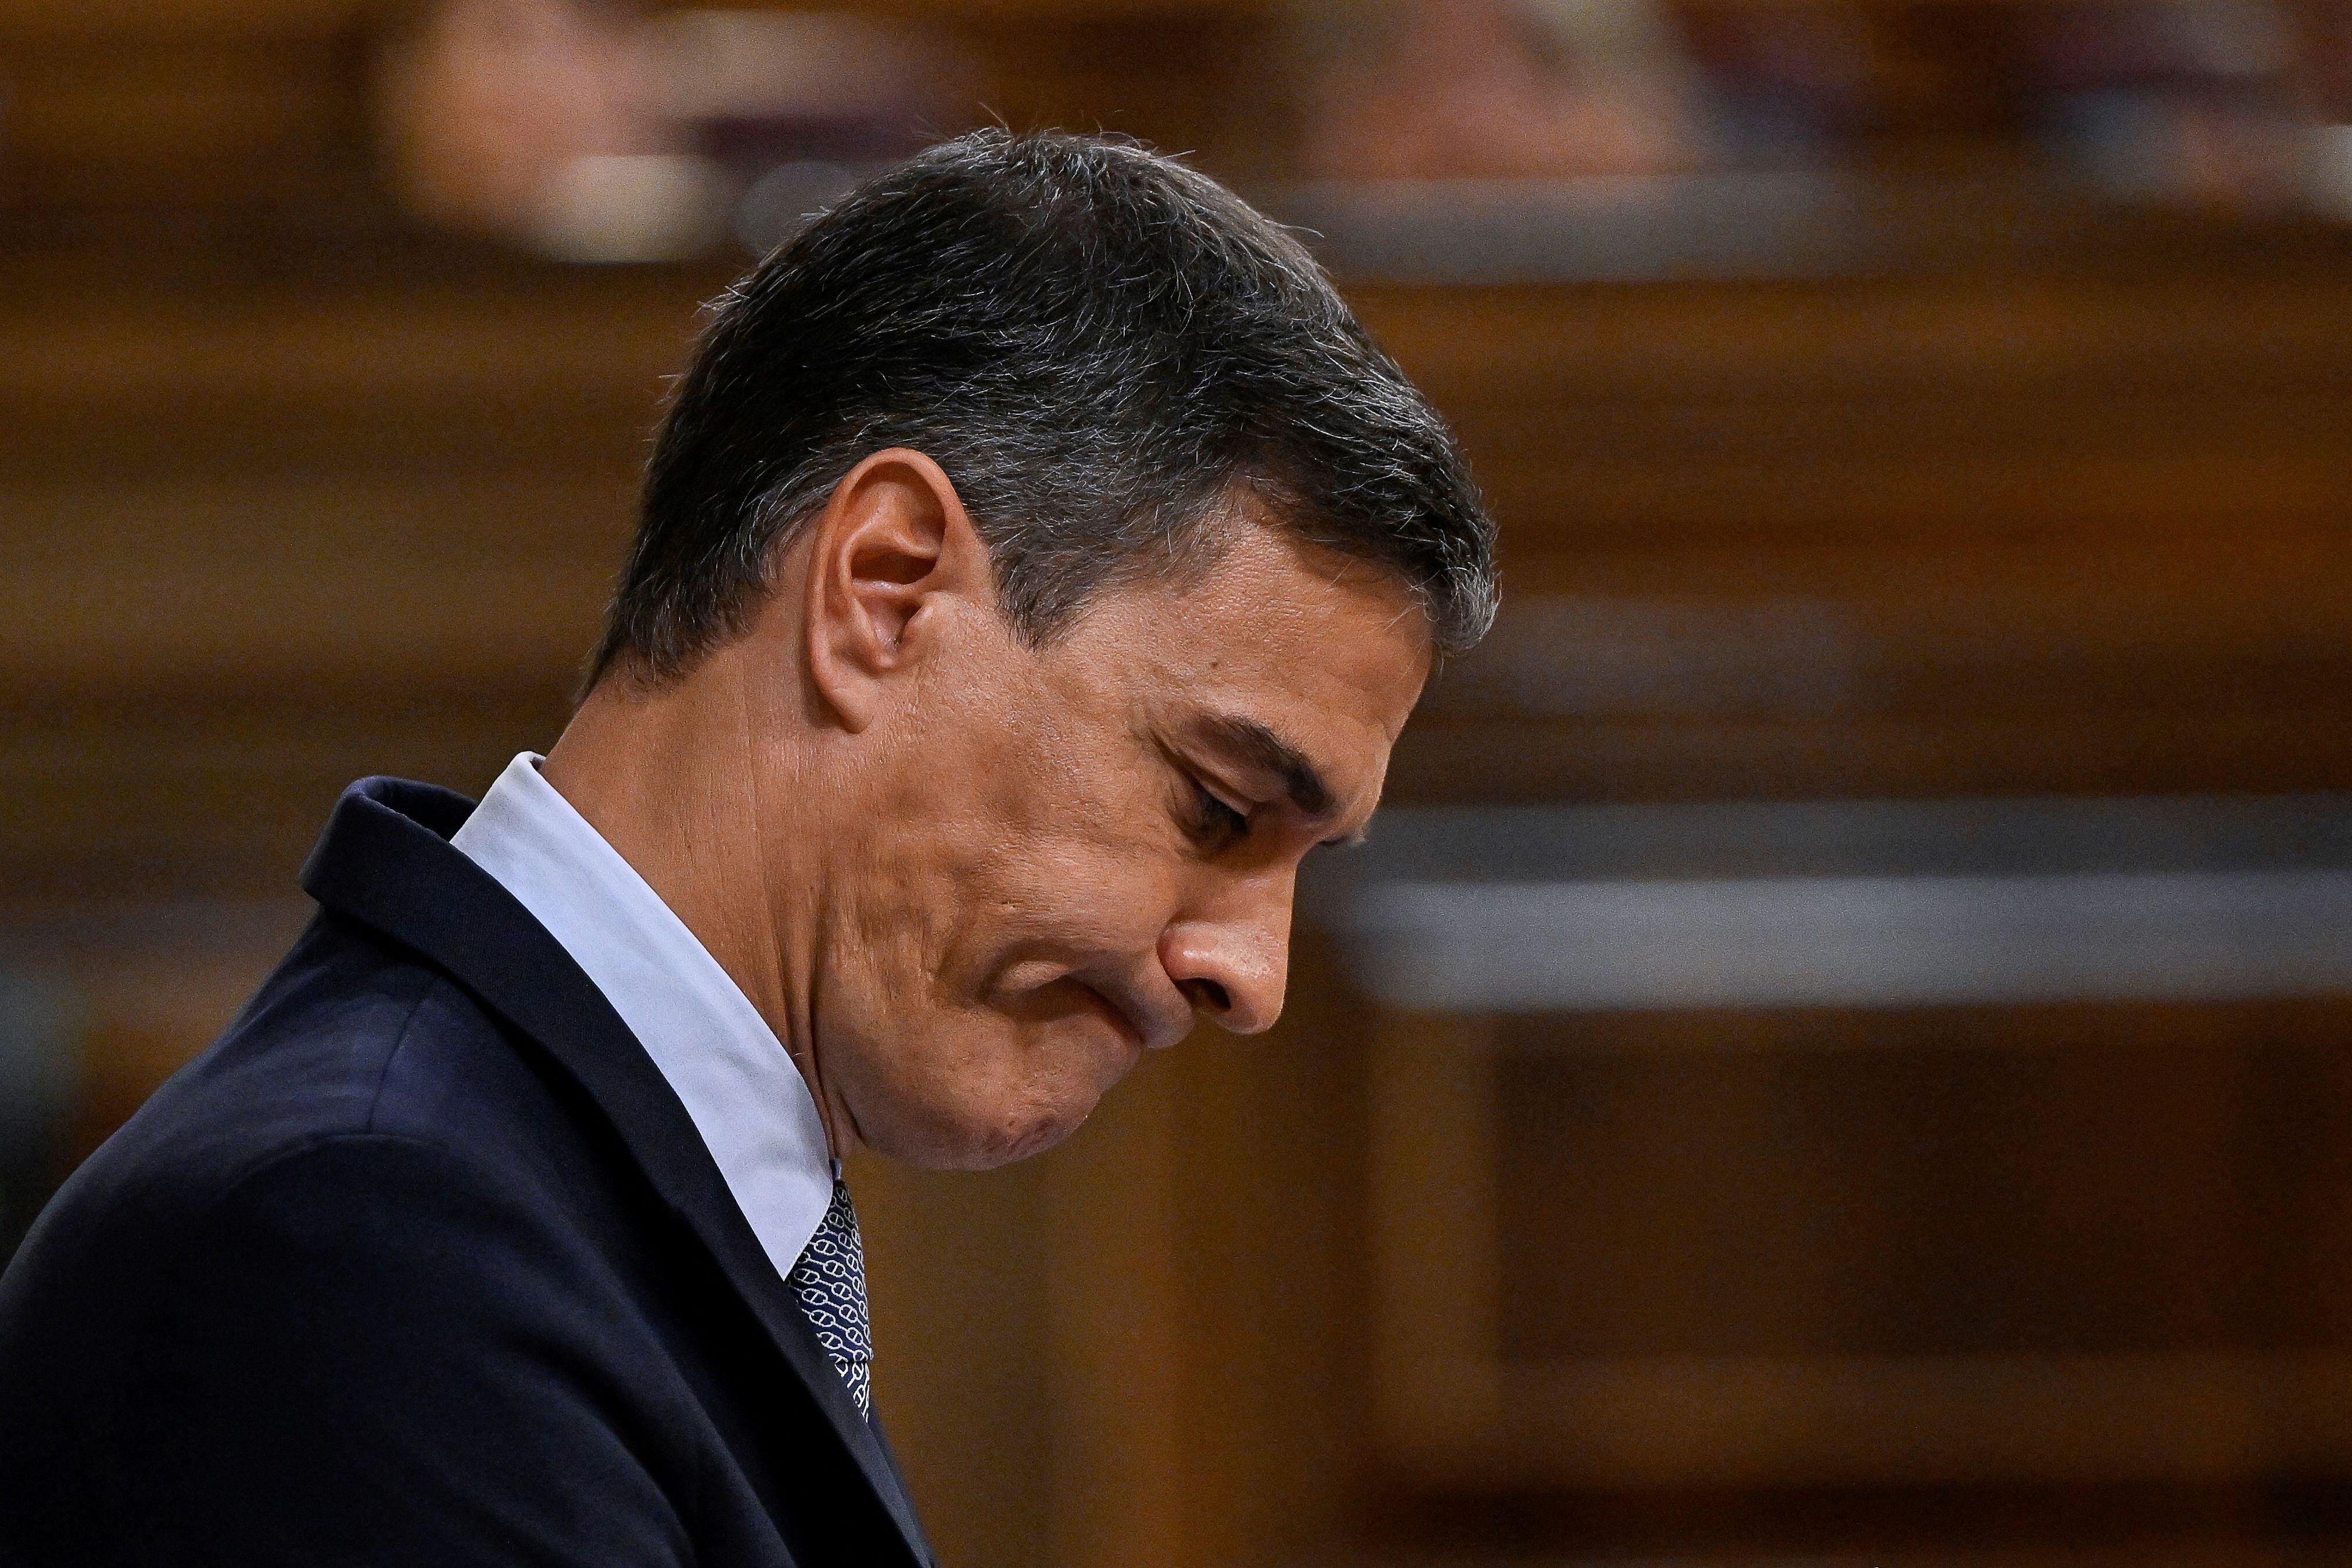 Spanish government dissolves Parliament and calls early elections for July 23